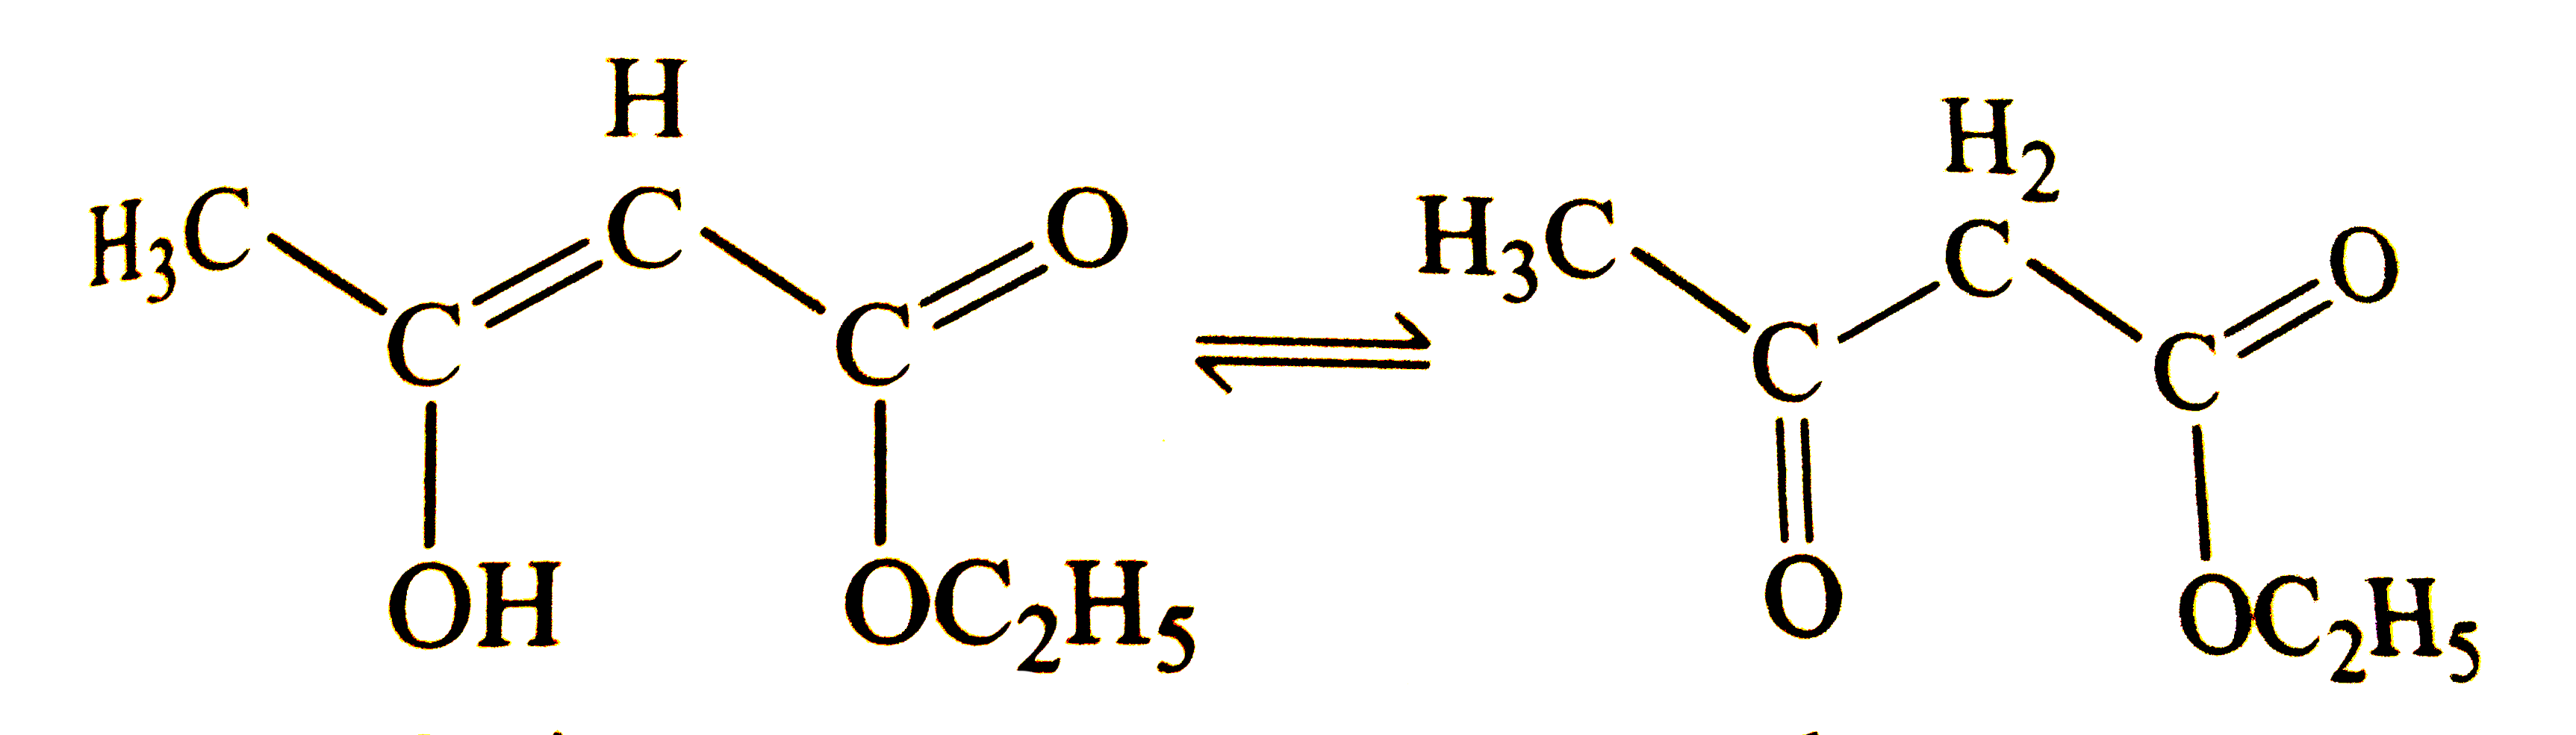 The enolic form of ethyl acetoacetate as shown below has